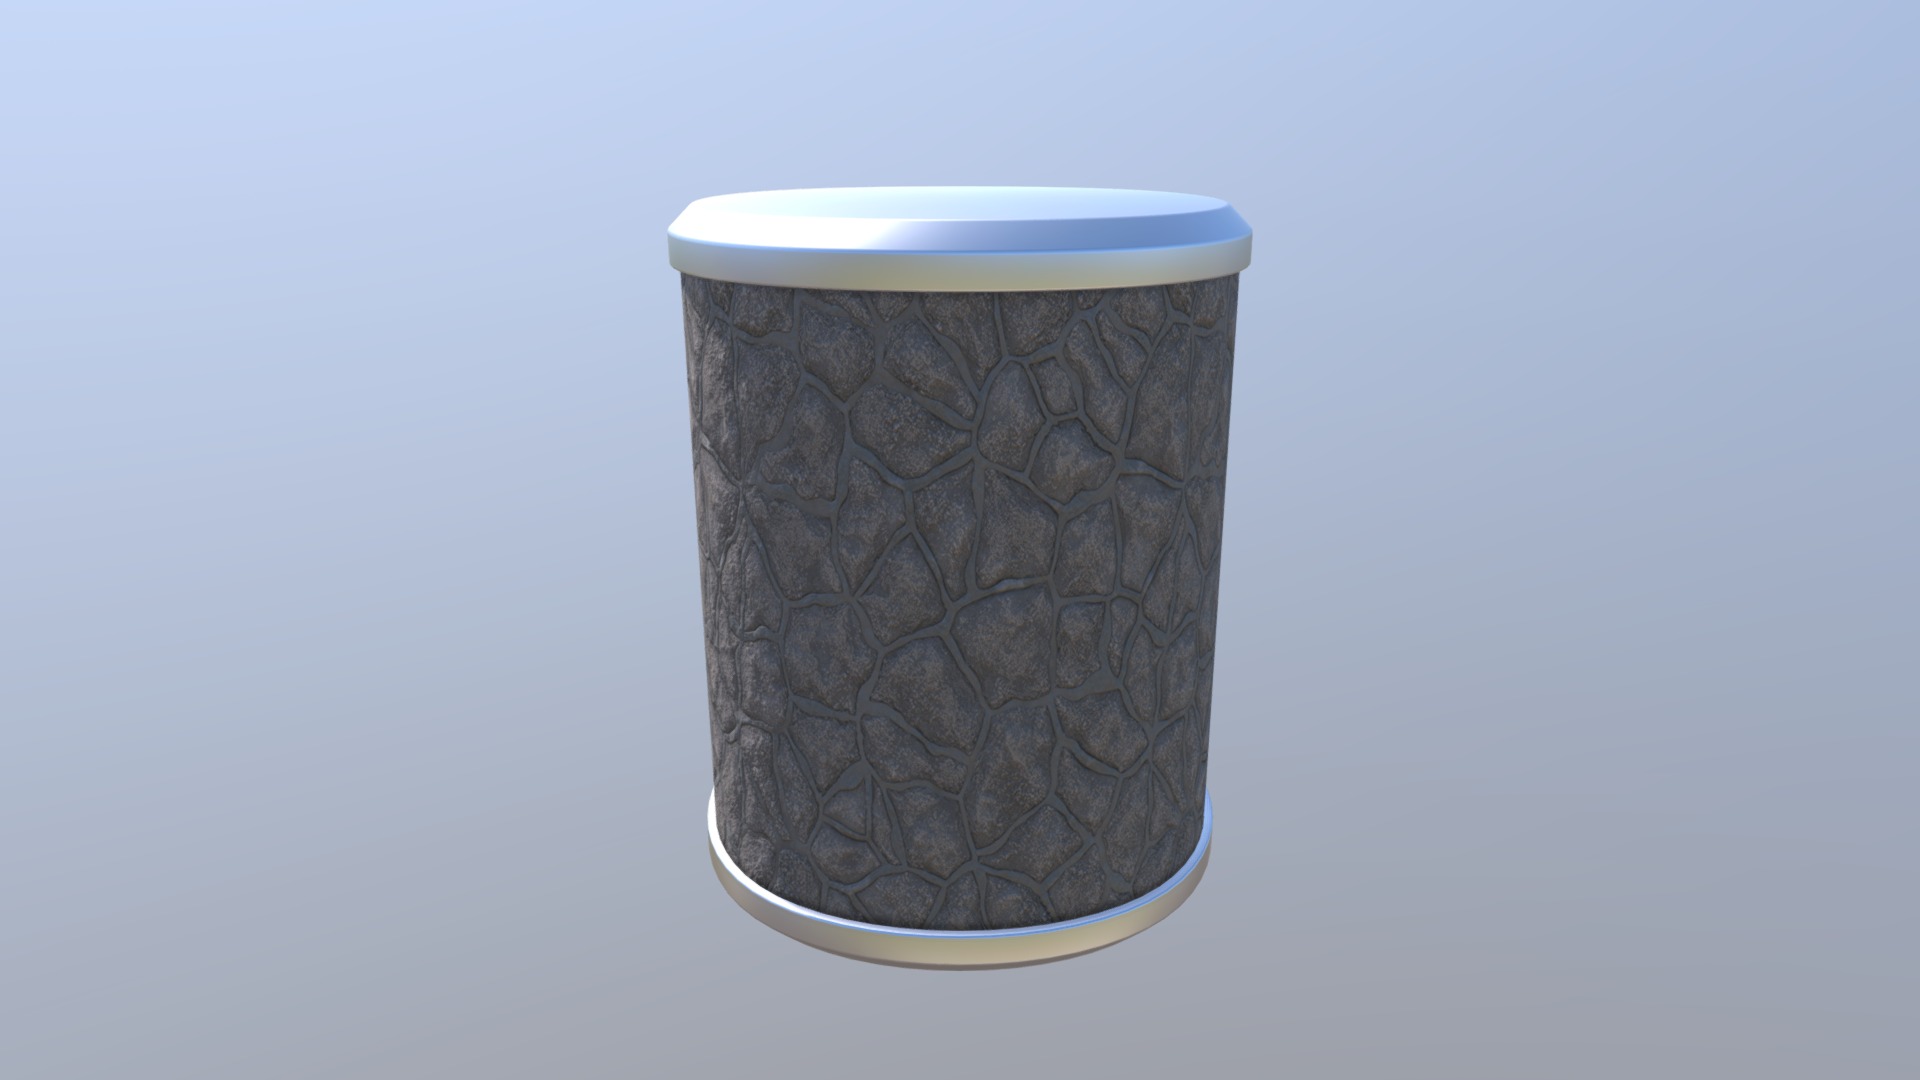 3D model Material - This is a 3D model of the Material. The 3D model is about a glass of brown liquid.